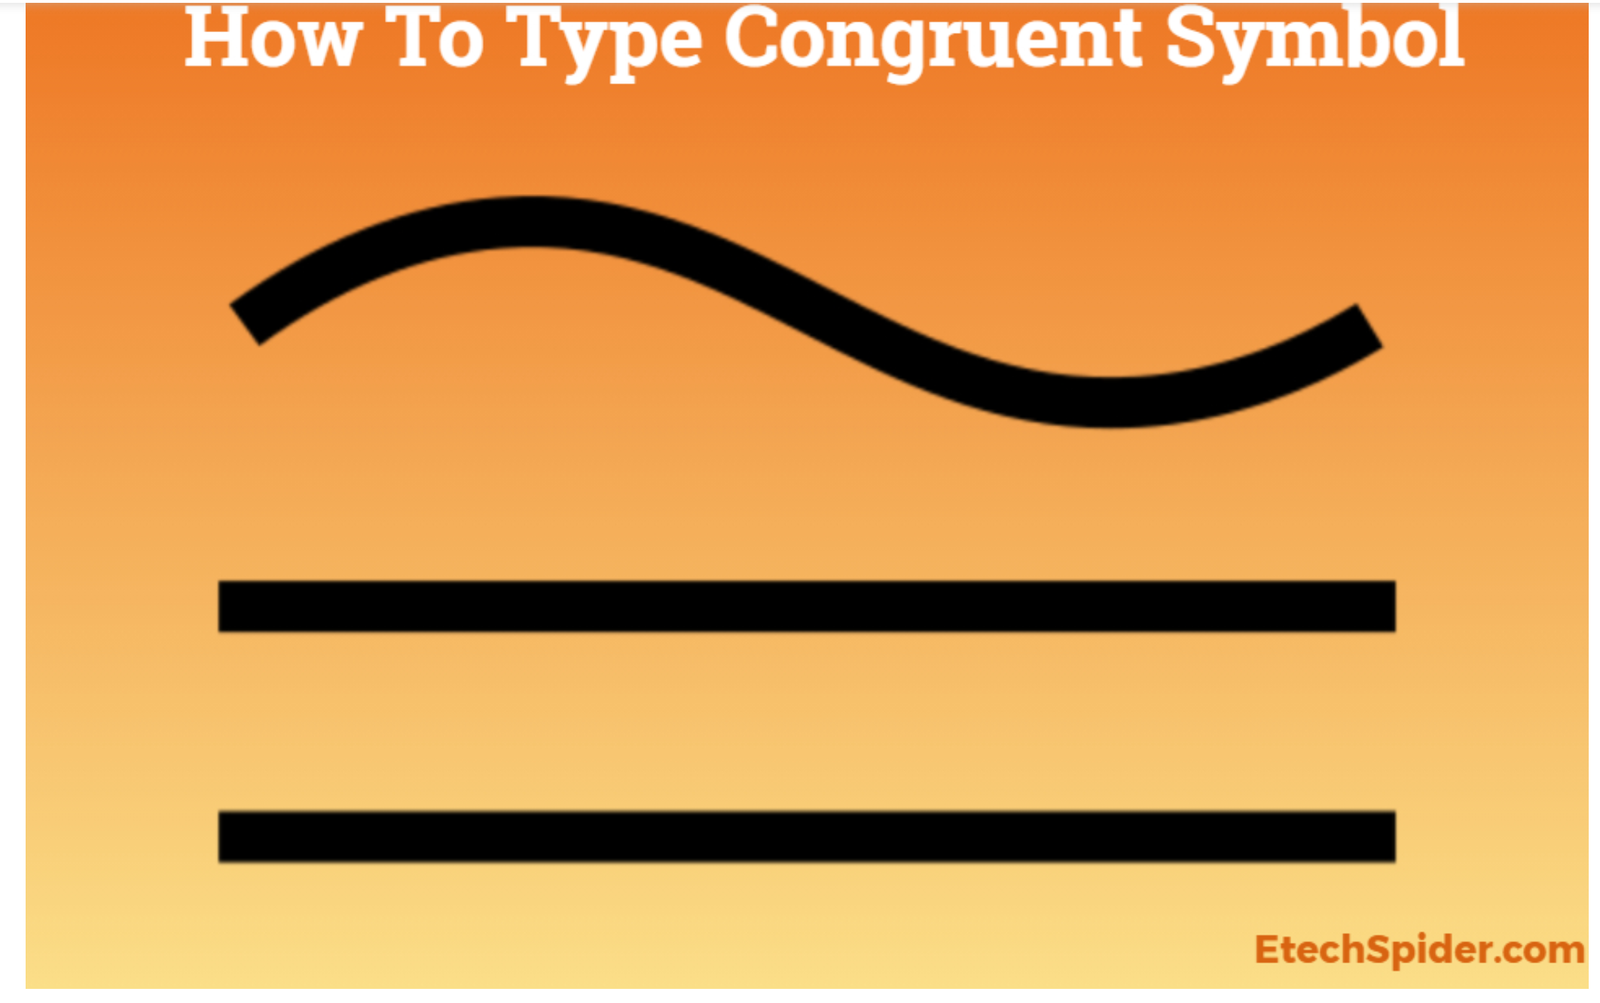 How to Type the Congruent Symbol